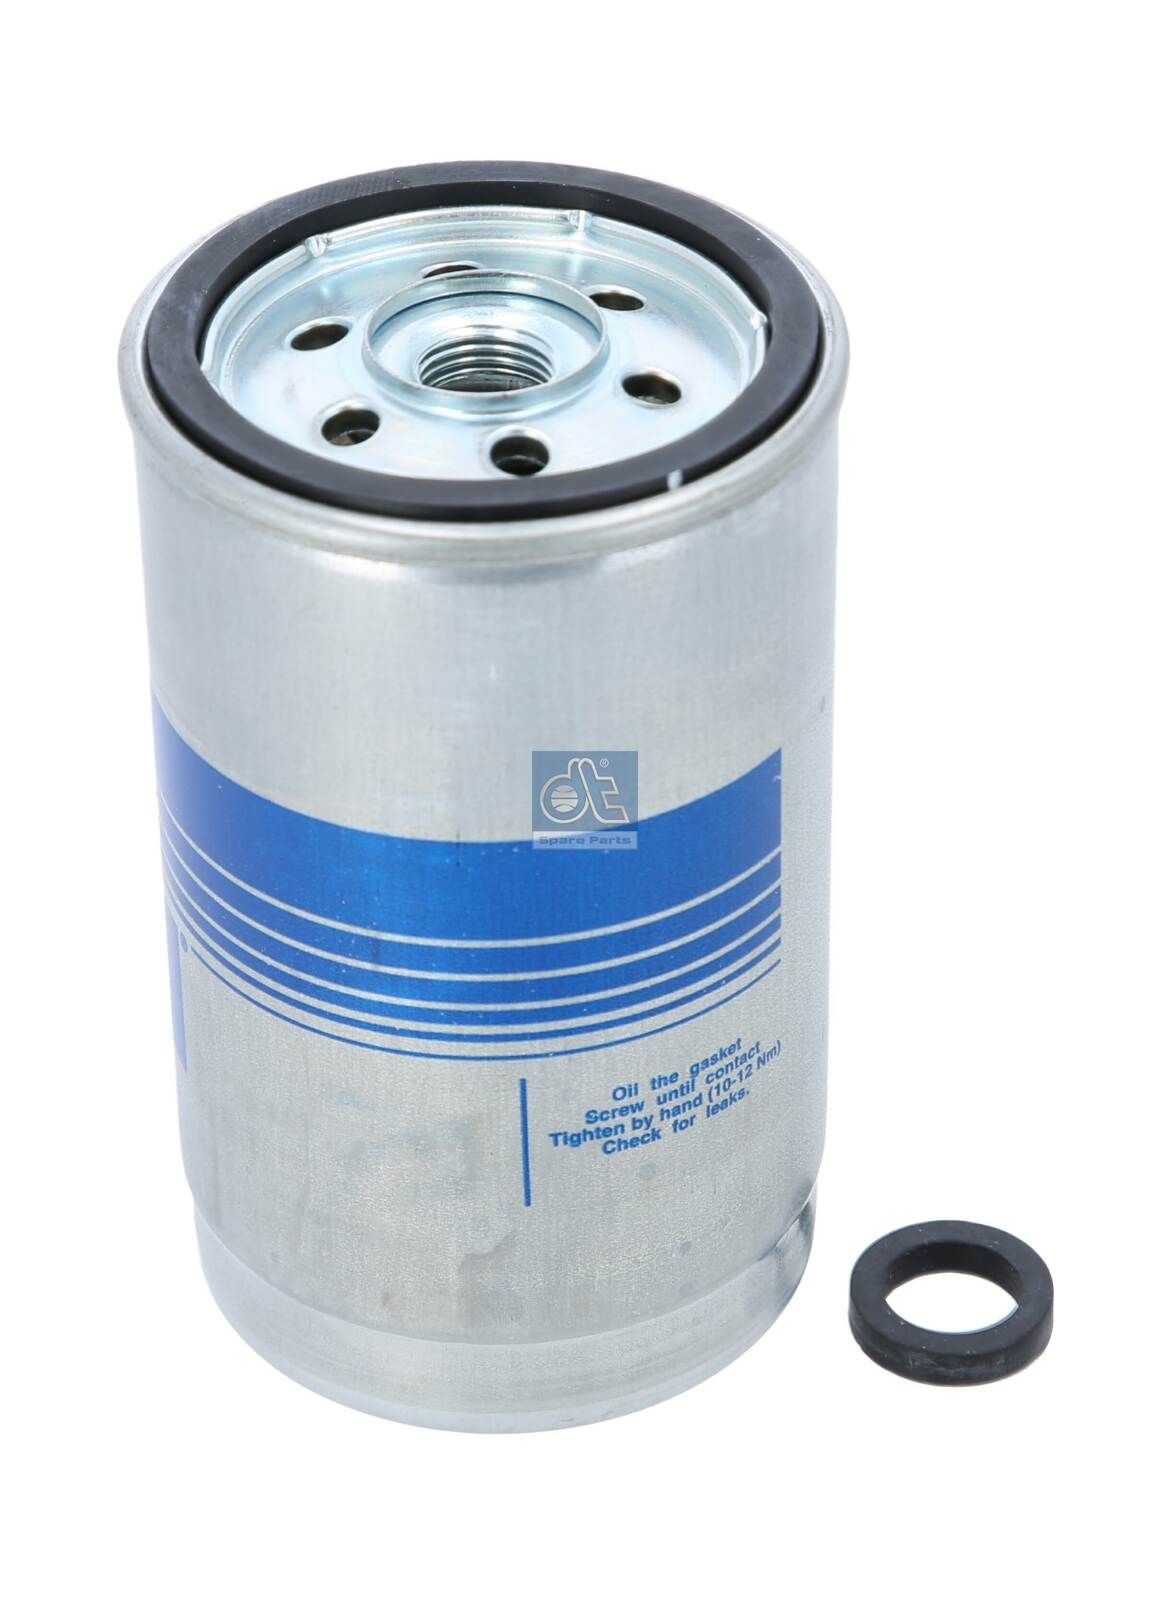 WDK 725 DT Spare Parts 3.22003 Fuel filter 51.12503.0016